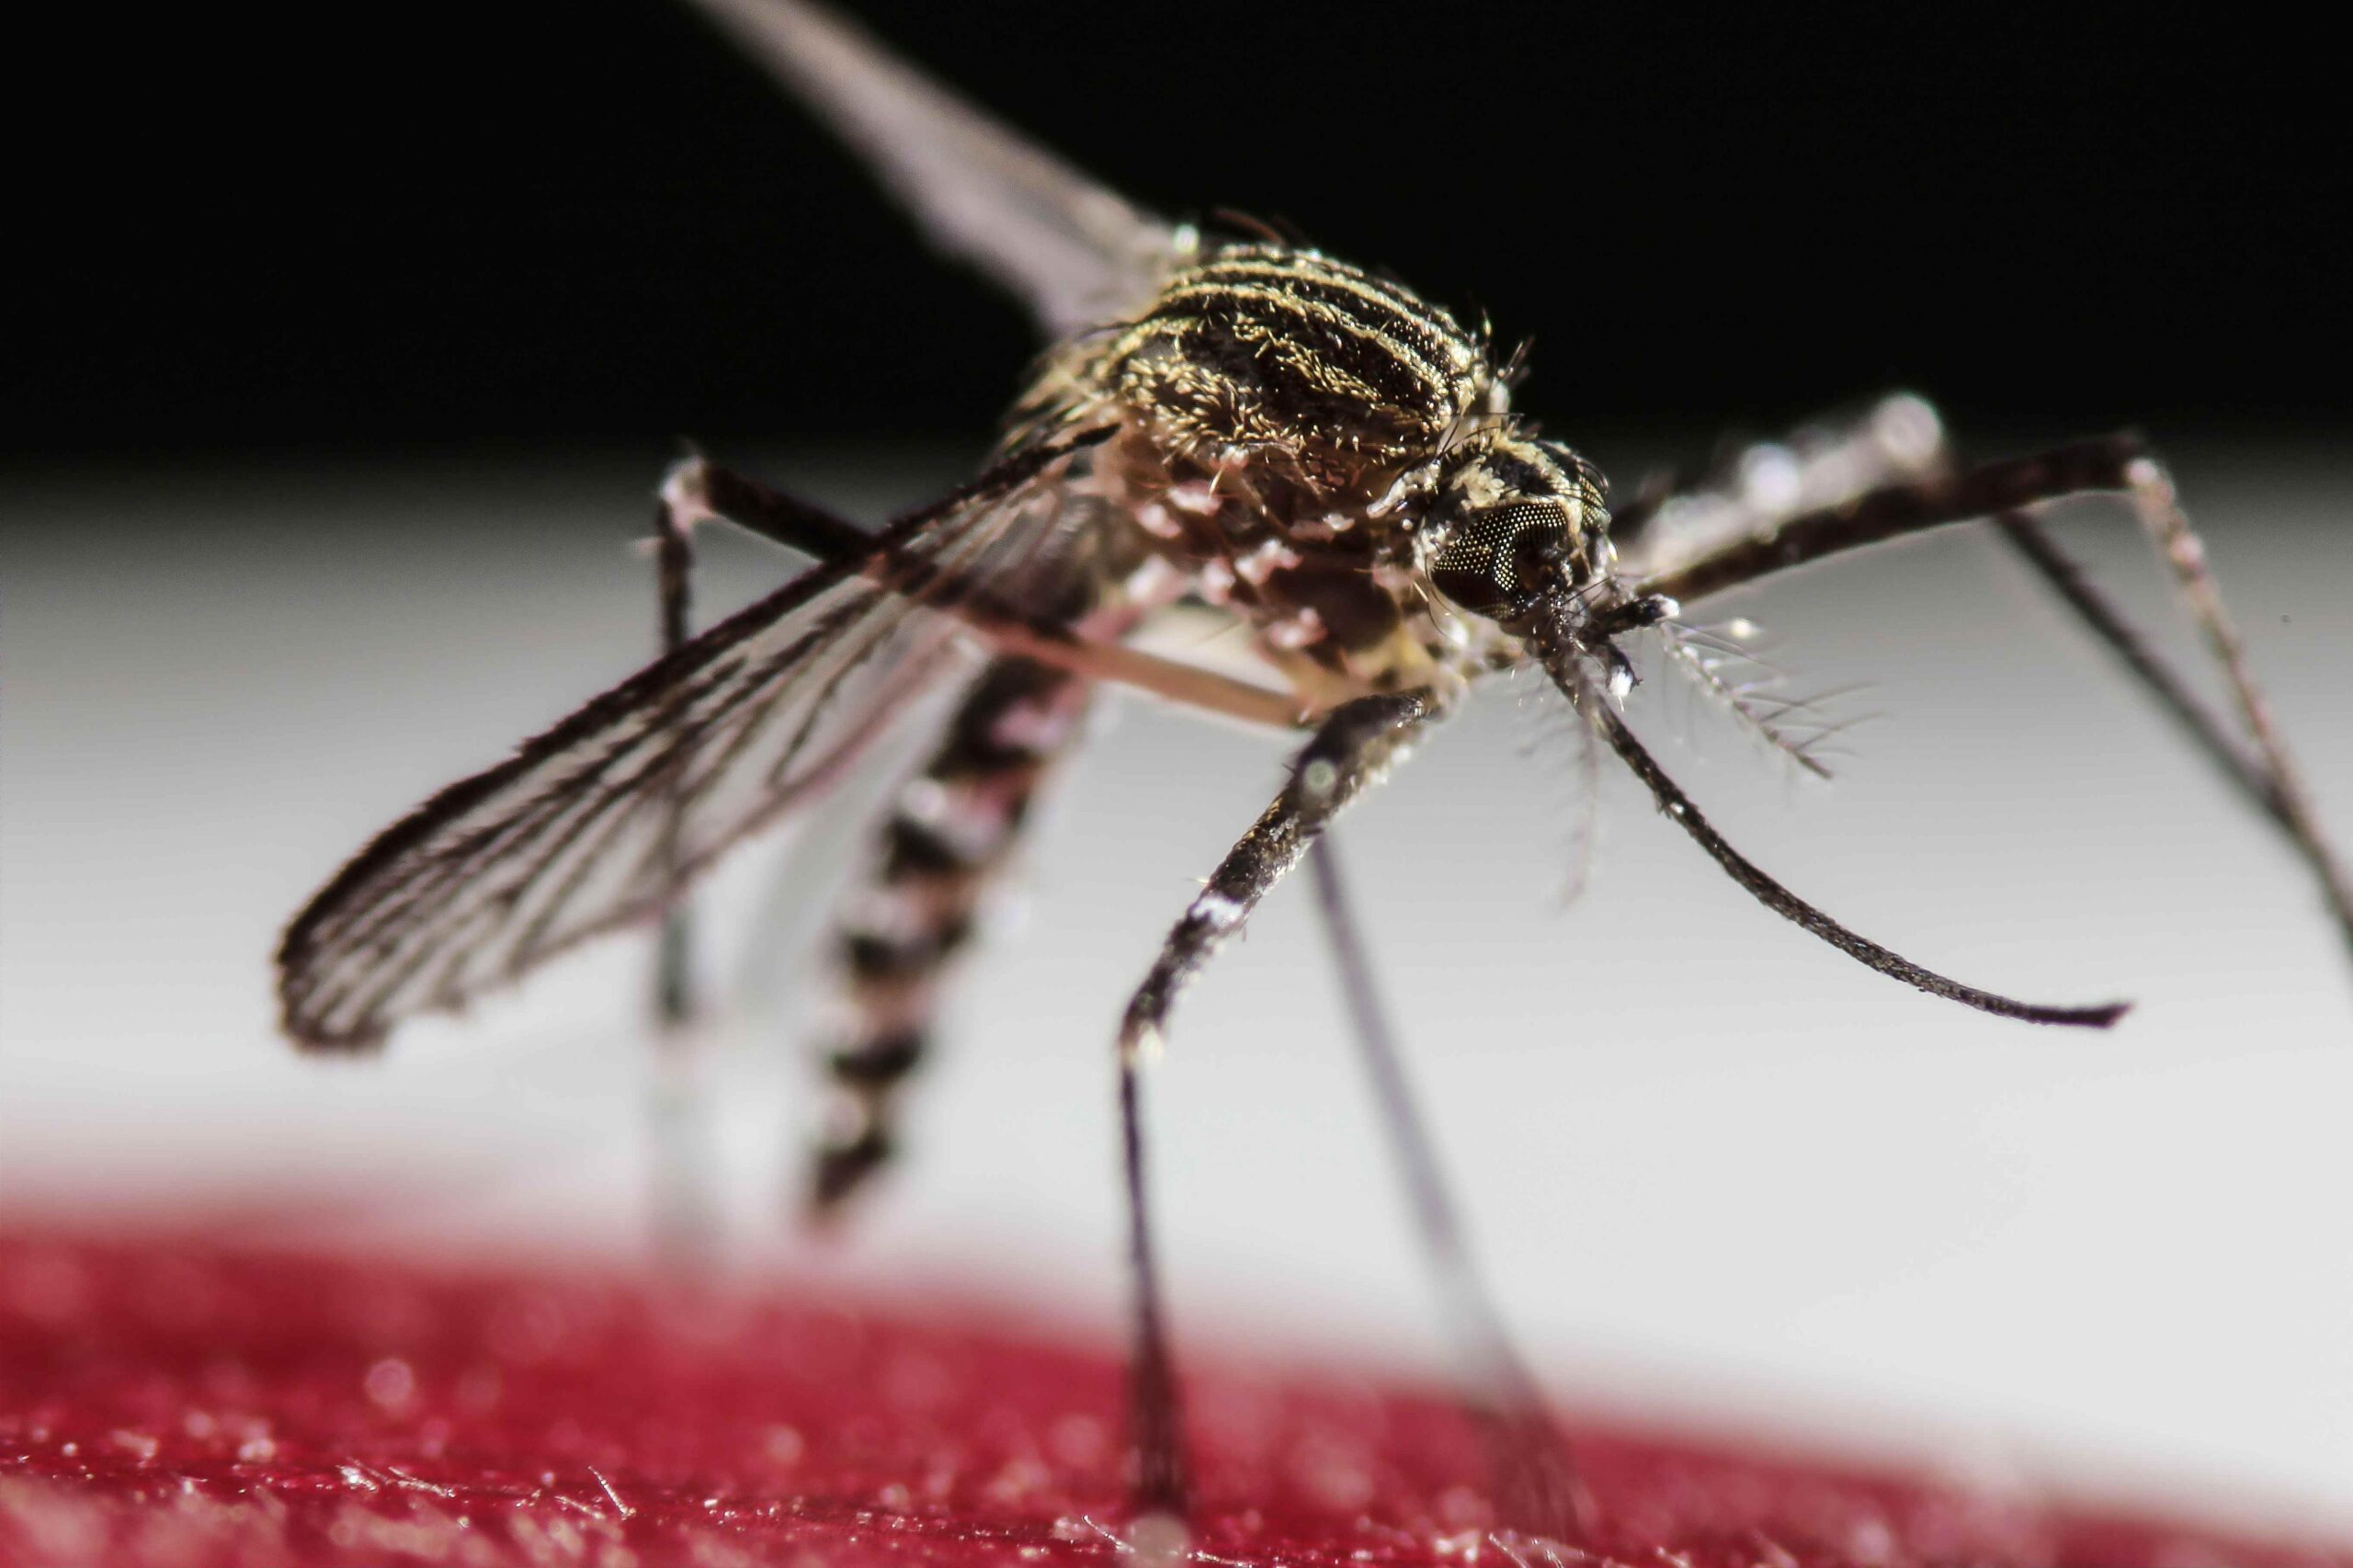 Irradiated mosquitoes to help zap Zika’s power – scientists